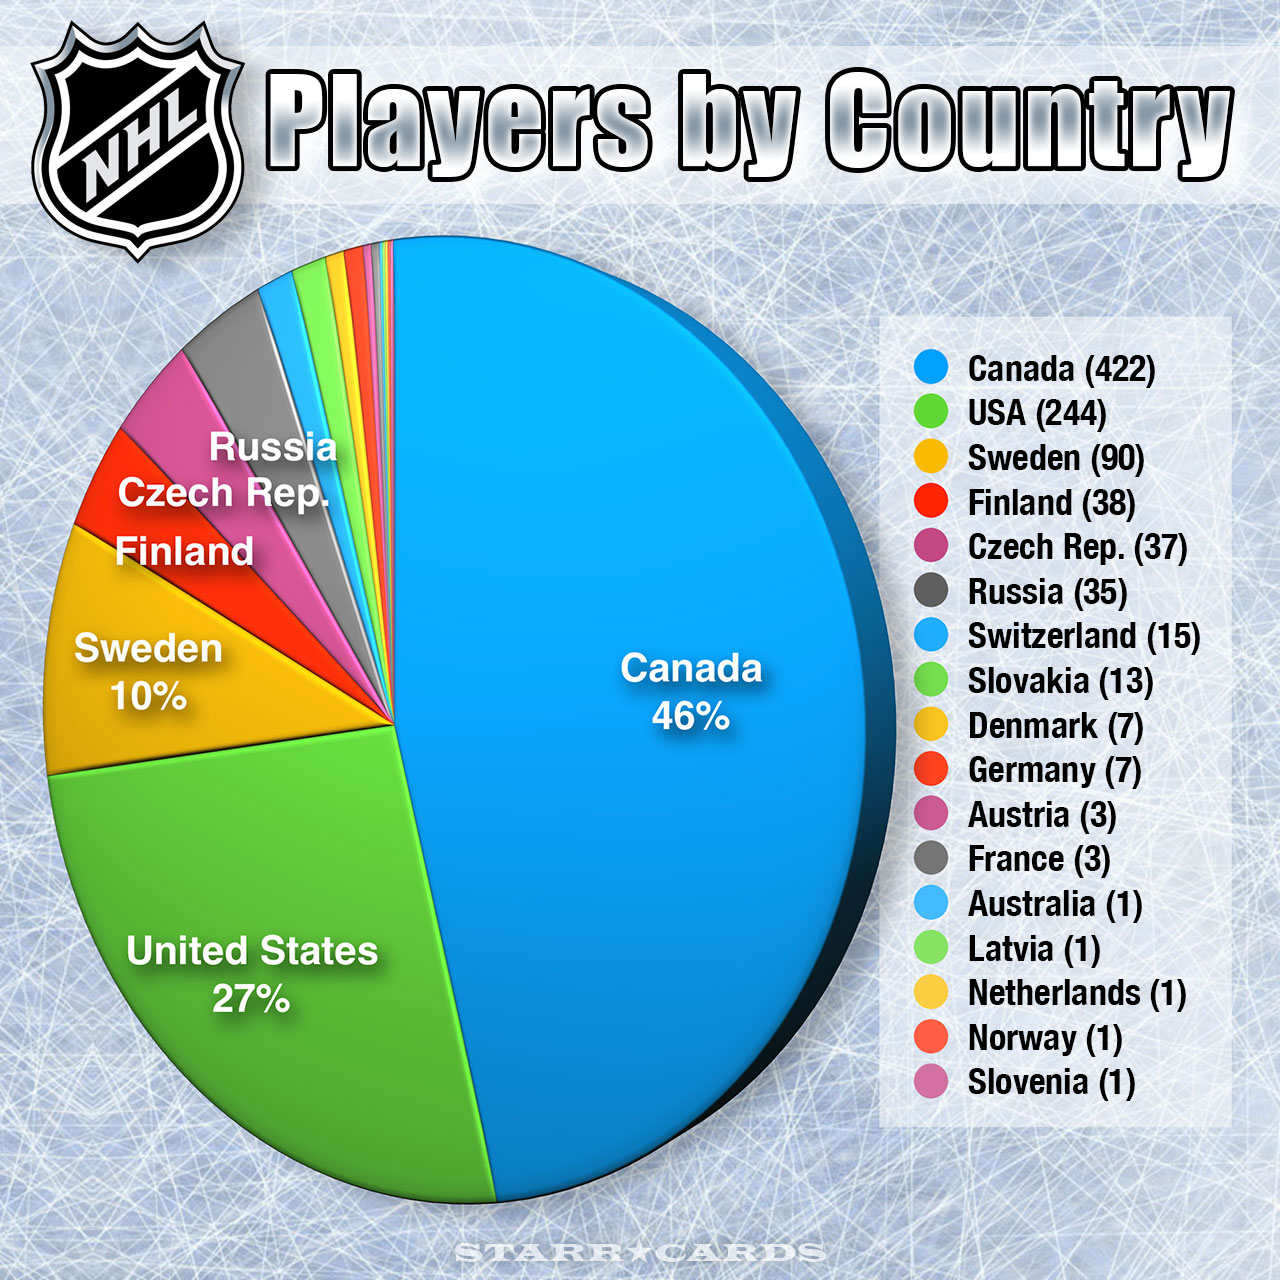 nhl players by country